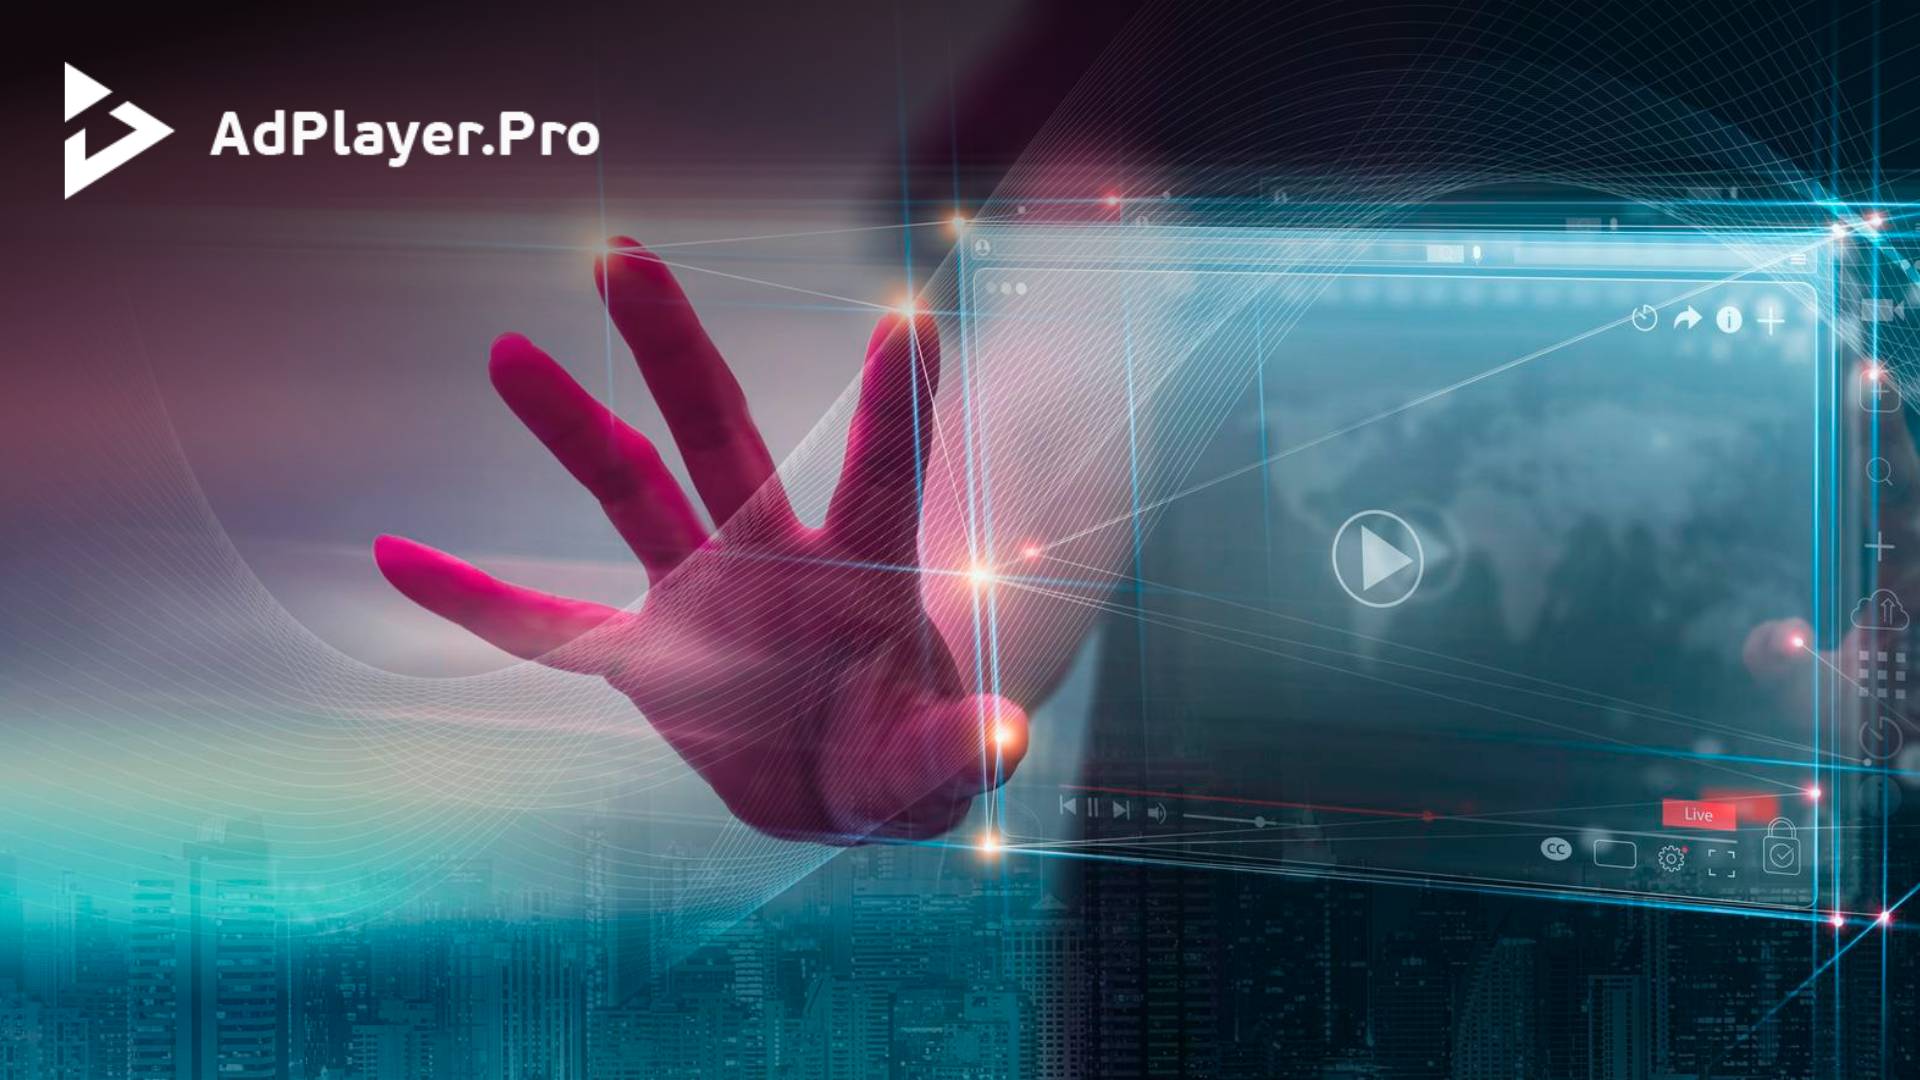 AdPlayer.Pro Enhances Video Ad Targeting with Key Feature Upgrades